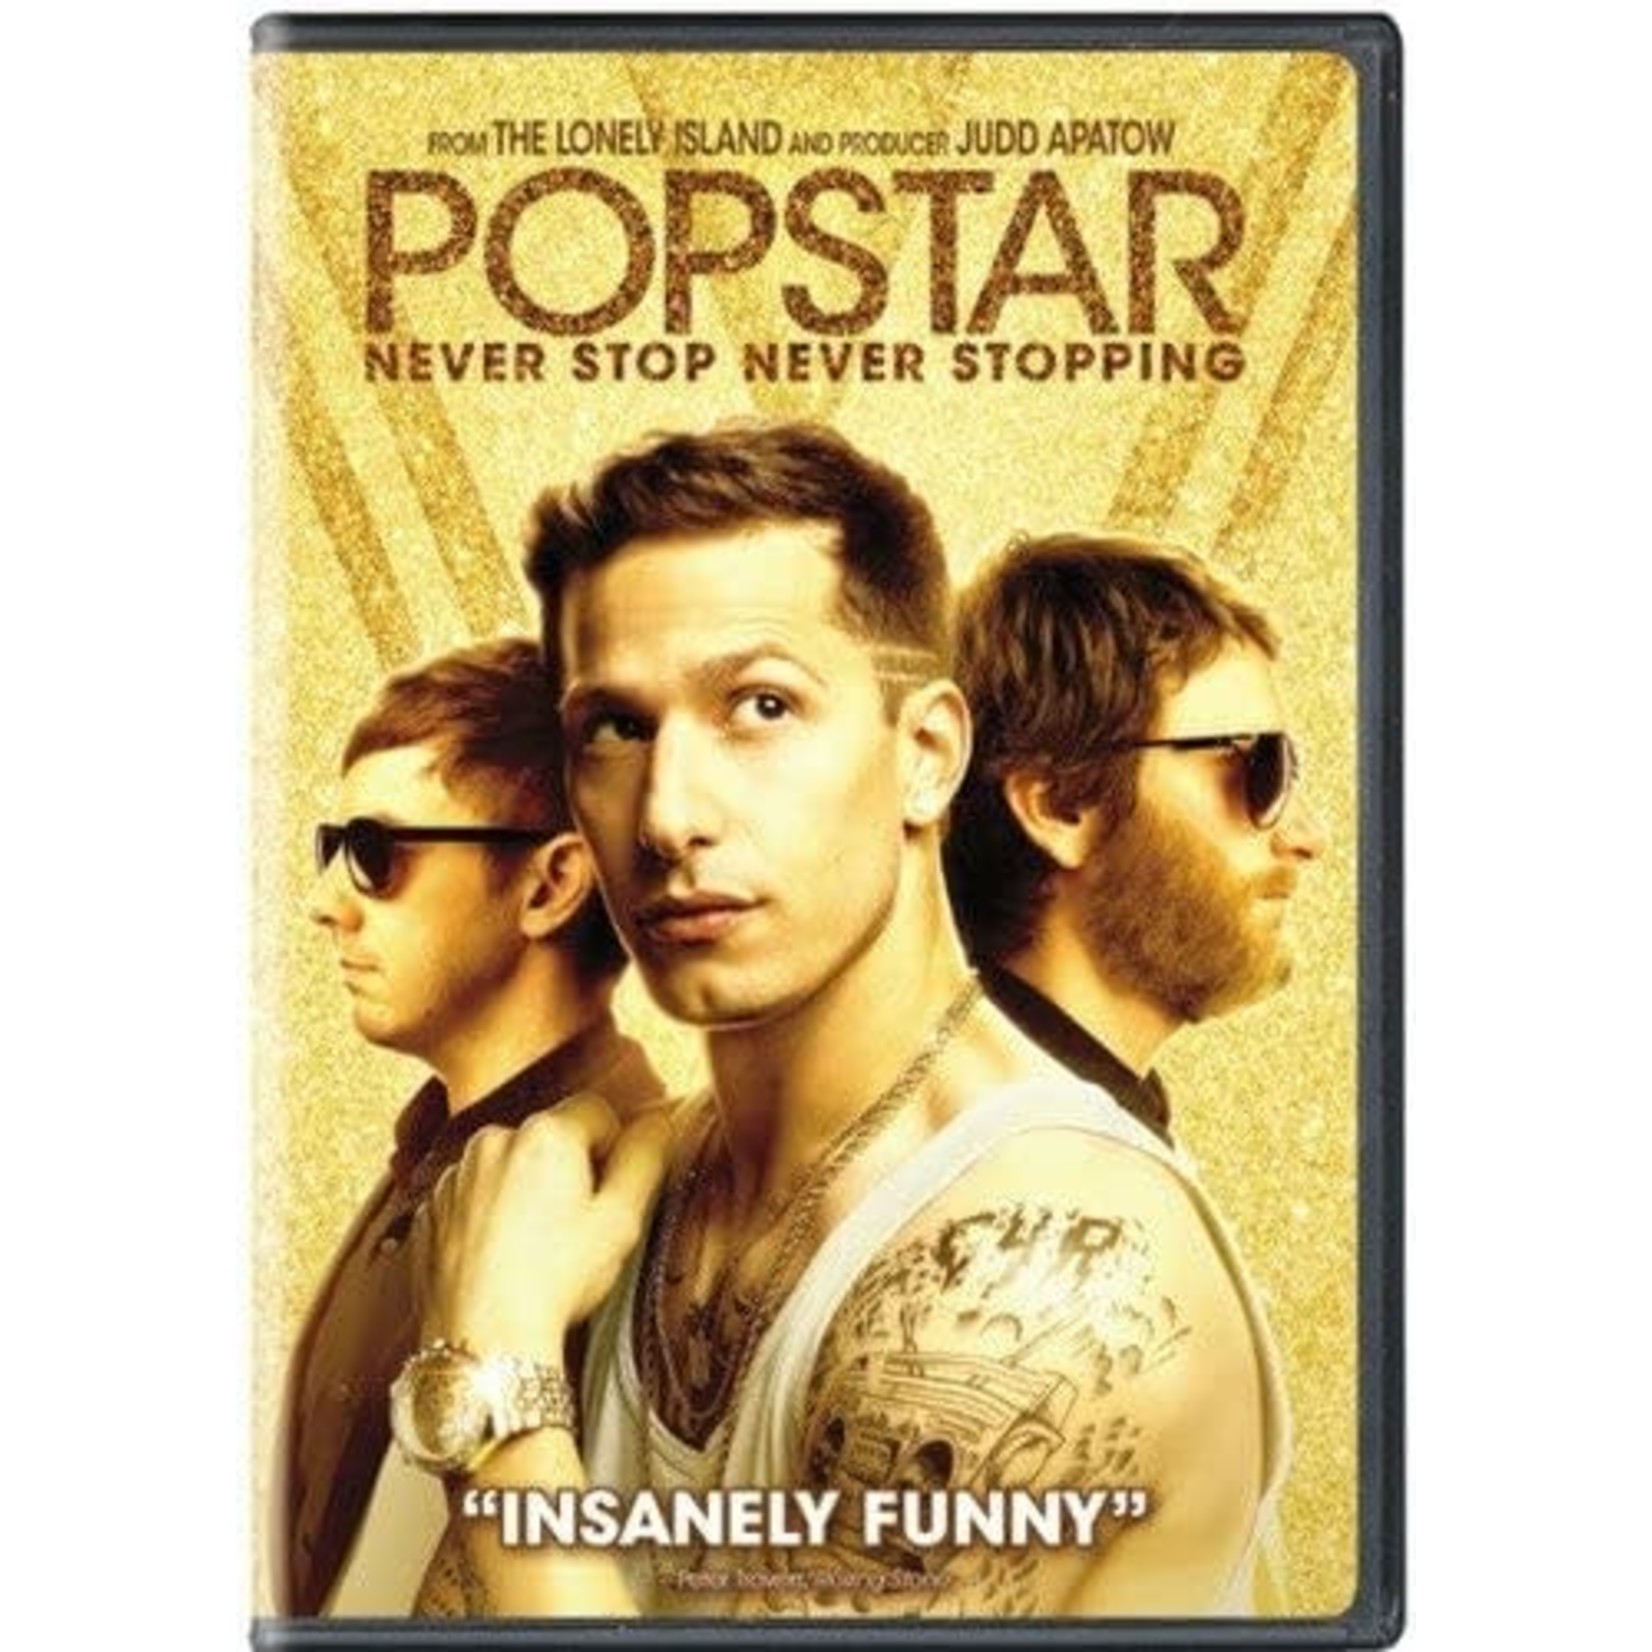 Popstar: Never Stop Never Stopping (2016) [USED DVD]